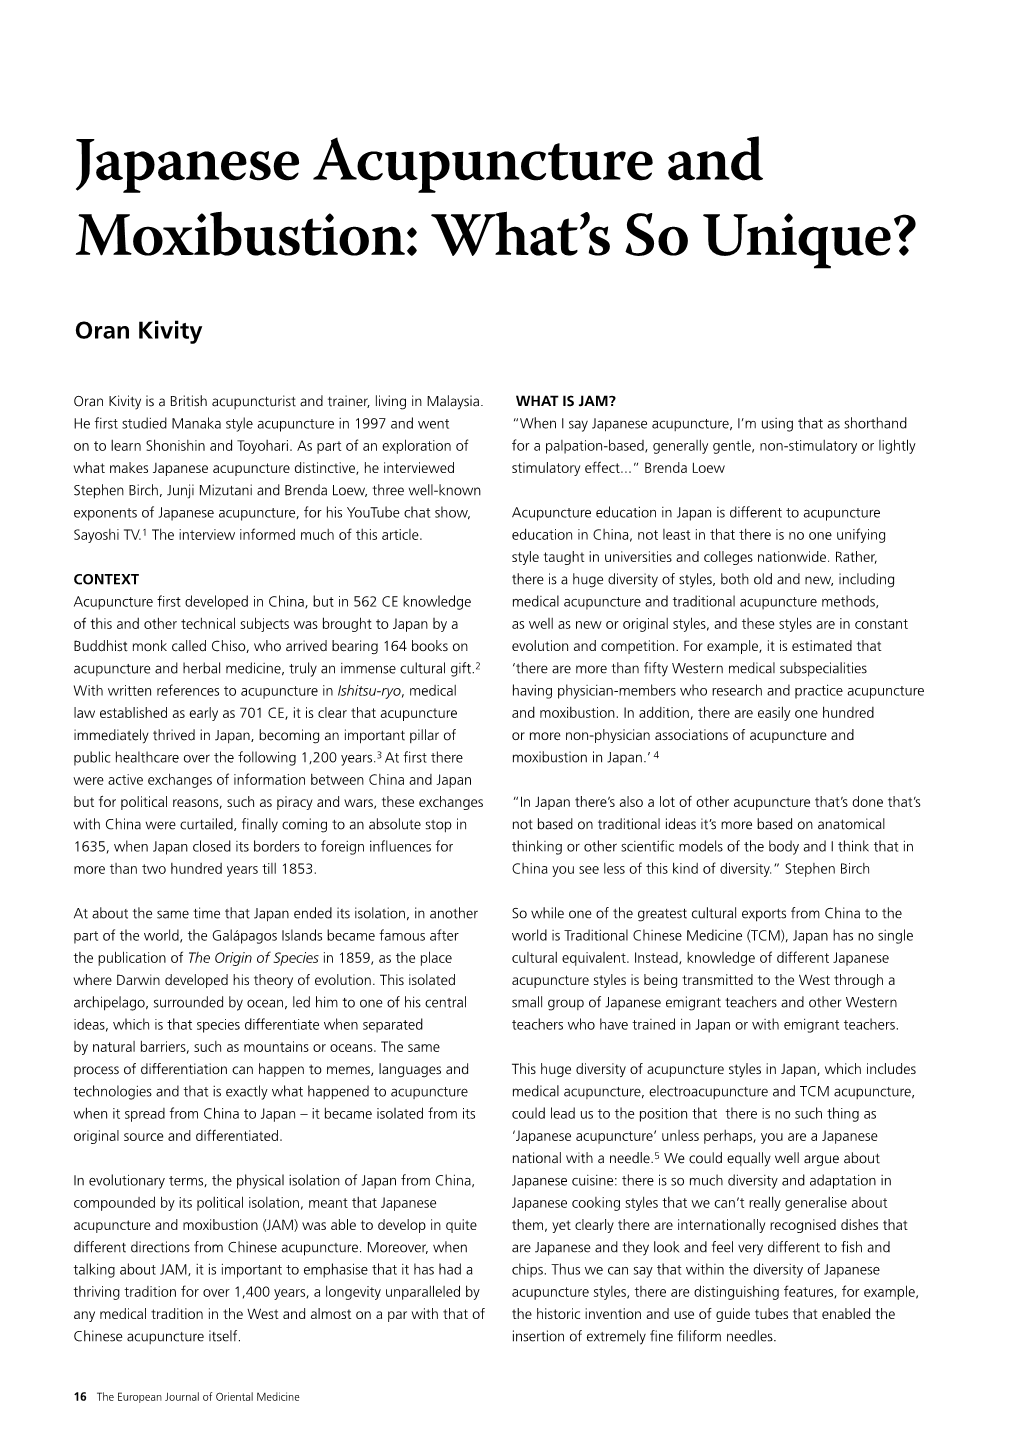 Japanese Acupuncture and Moxibustion: What’S So Unique?